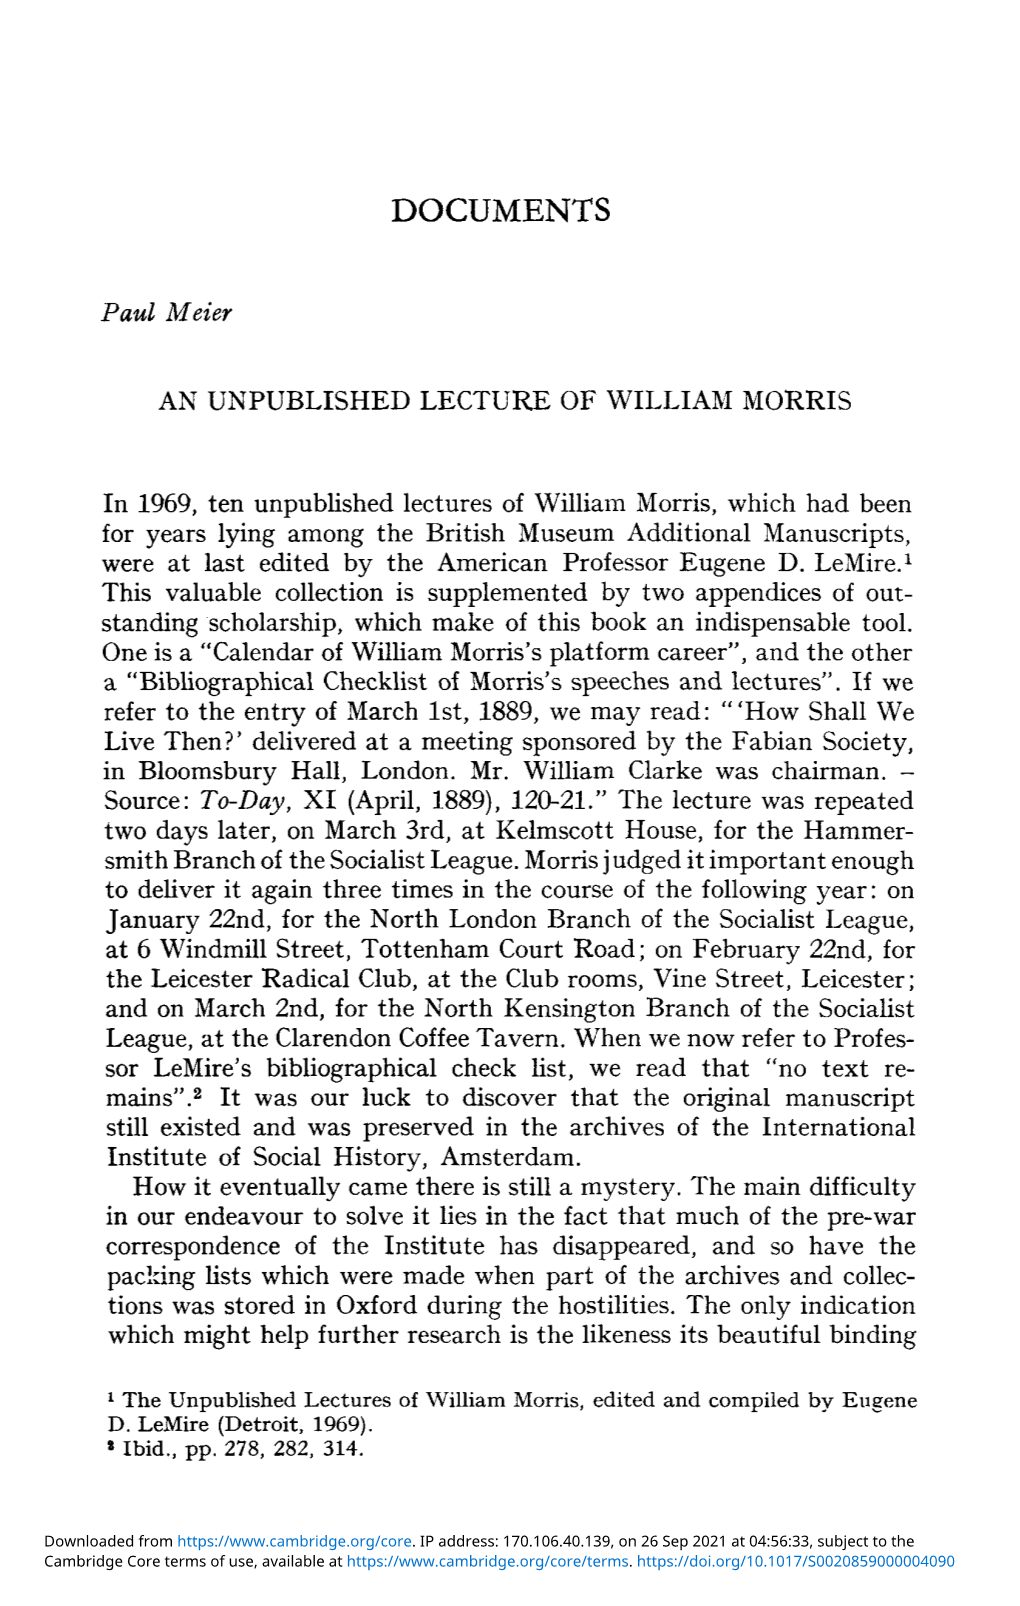 An Unpublished Lecture of William Morris